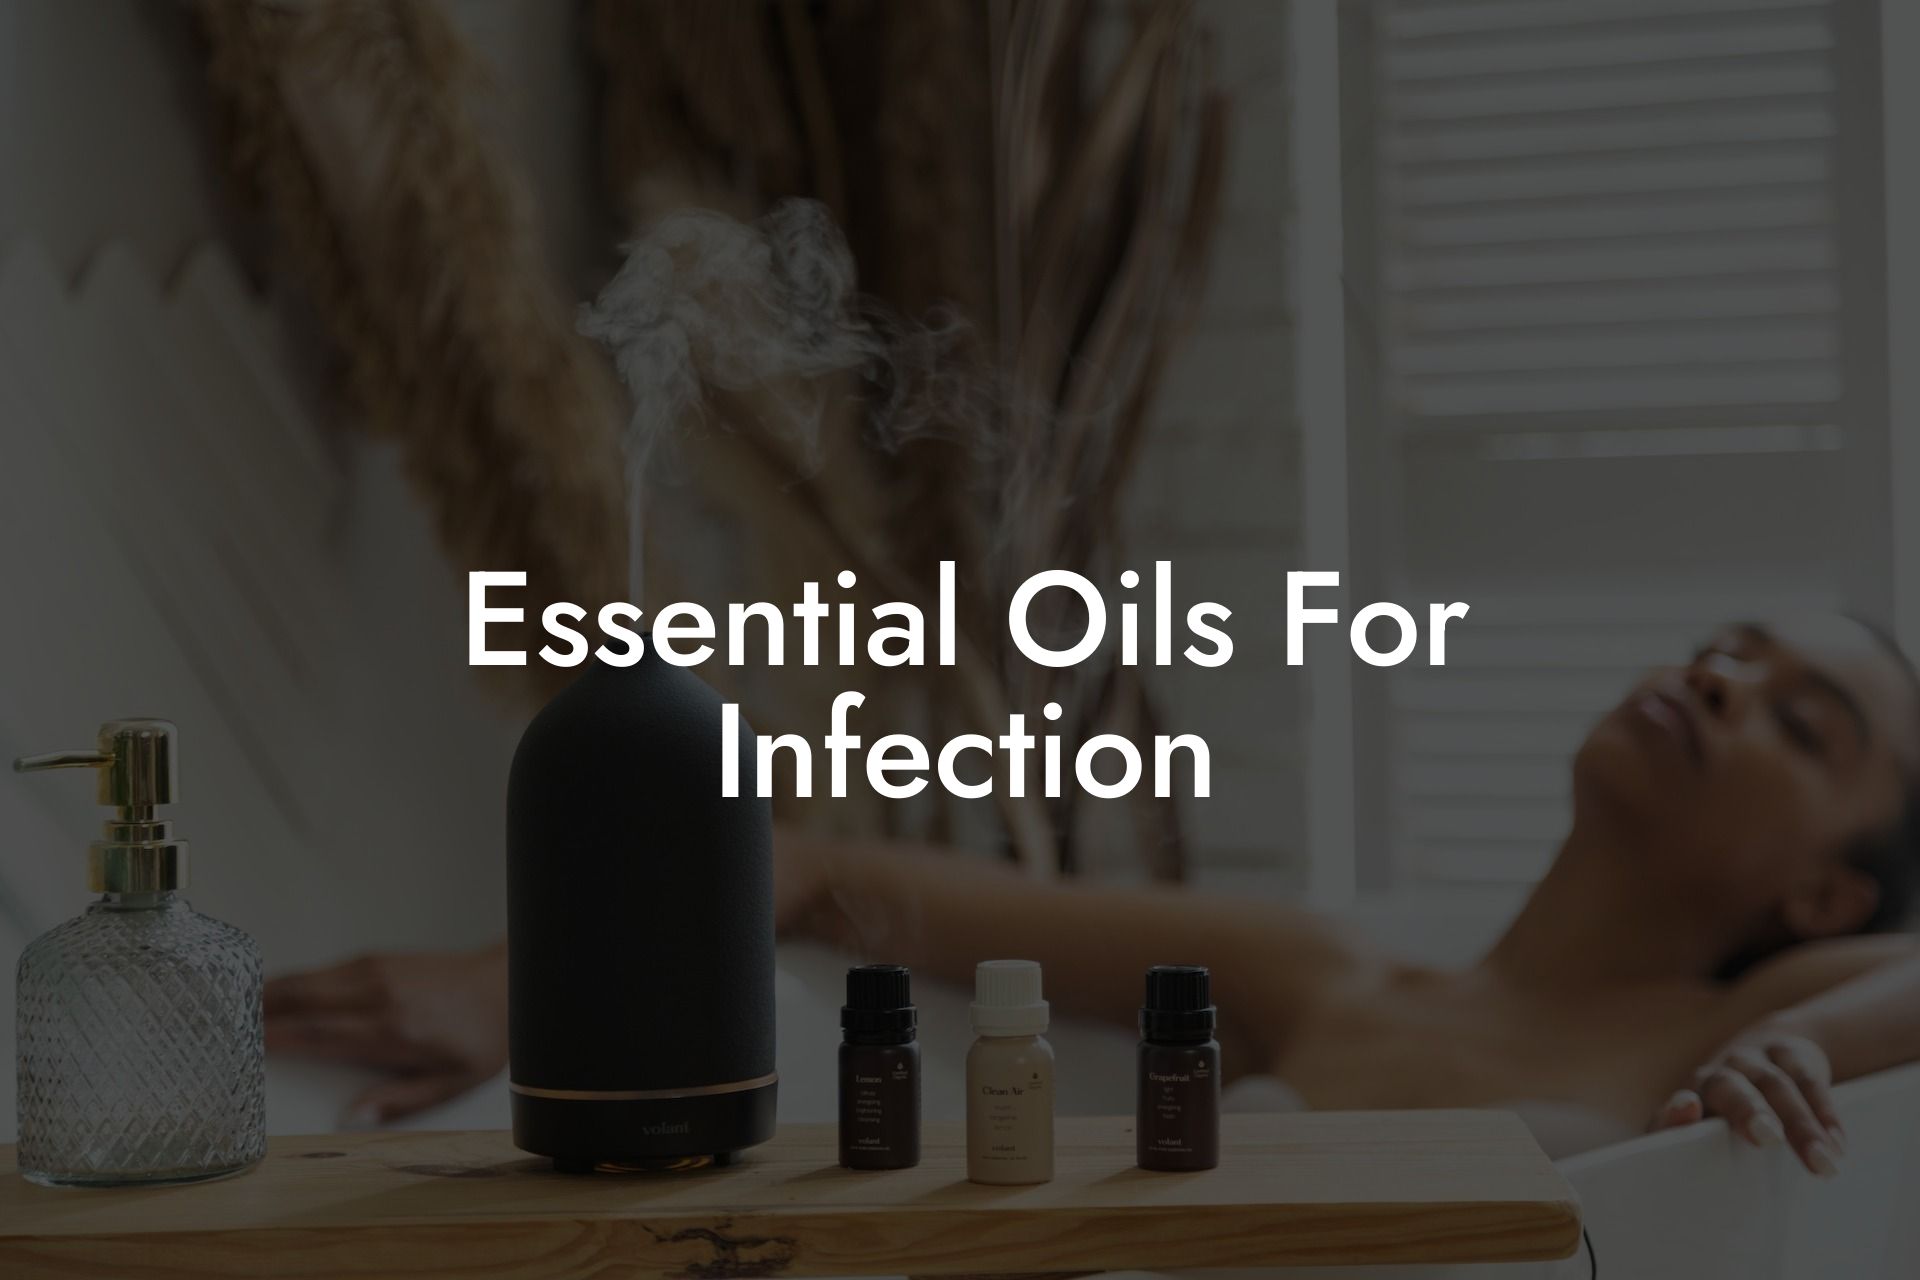 Essential Oils For Infection